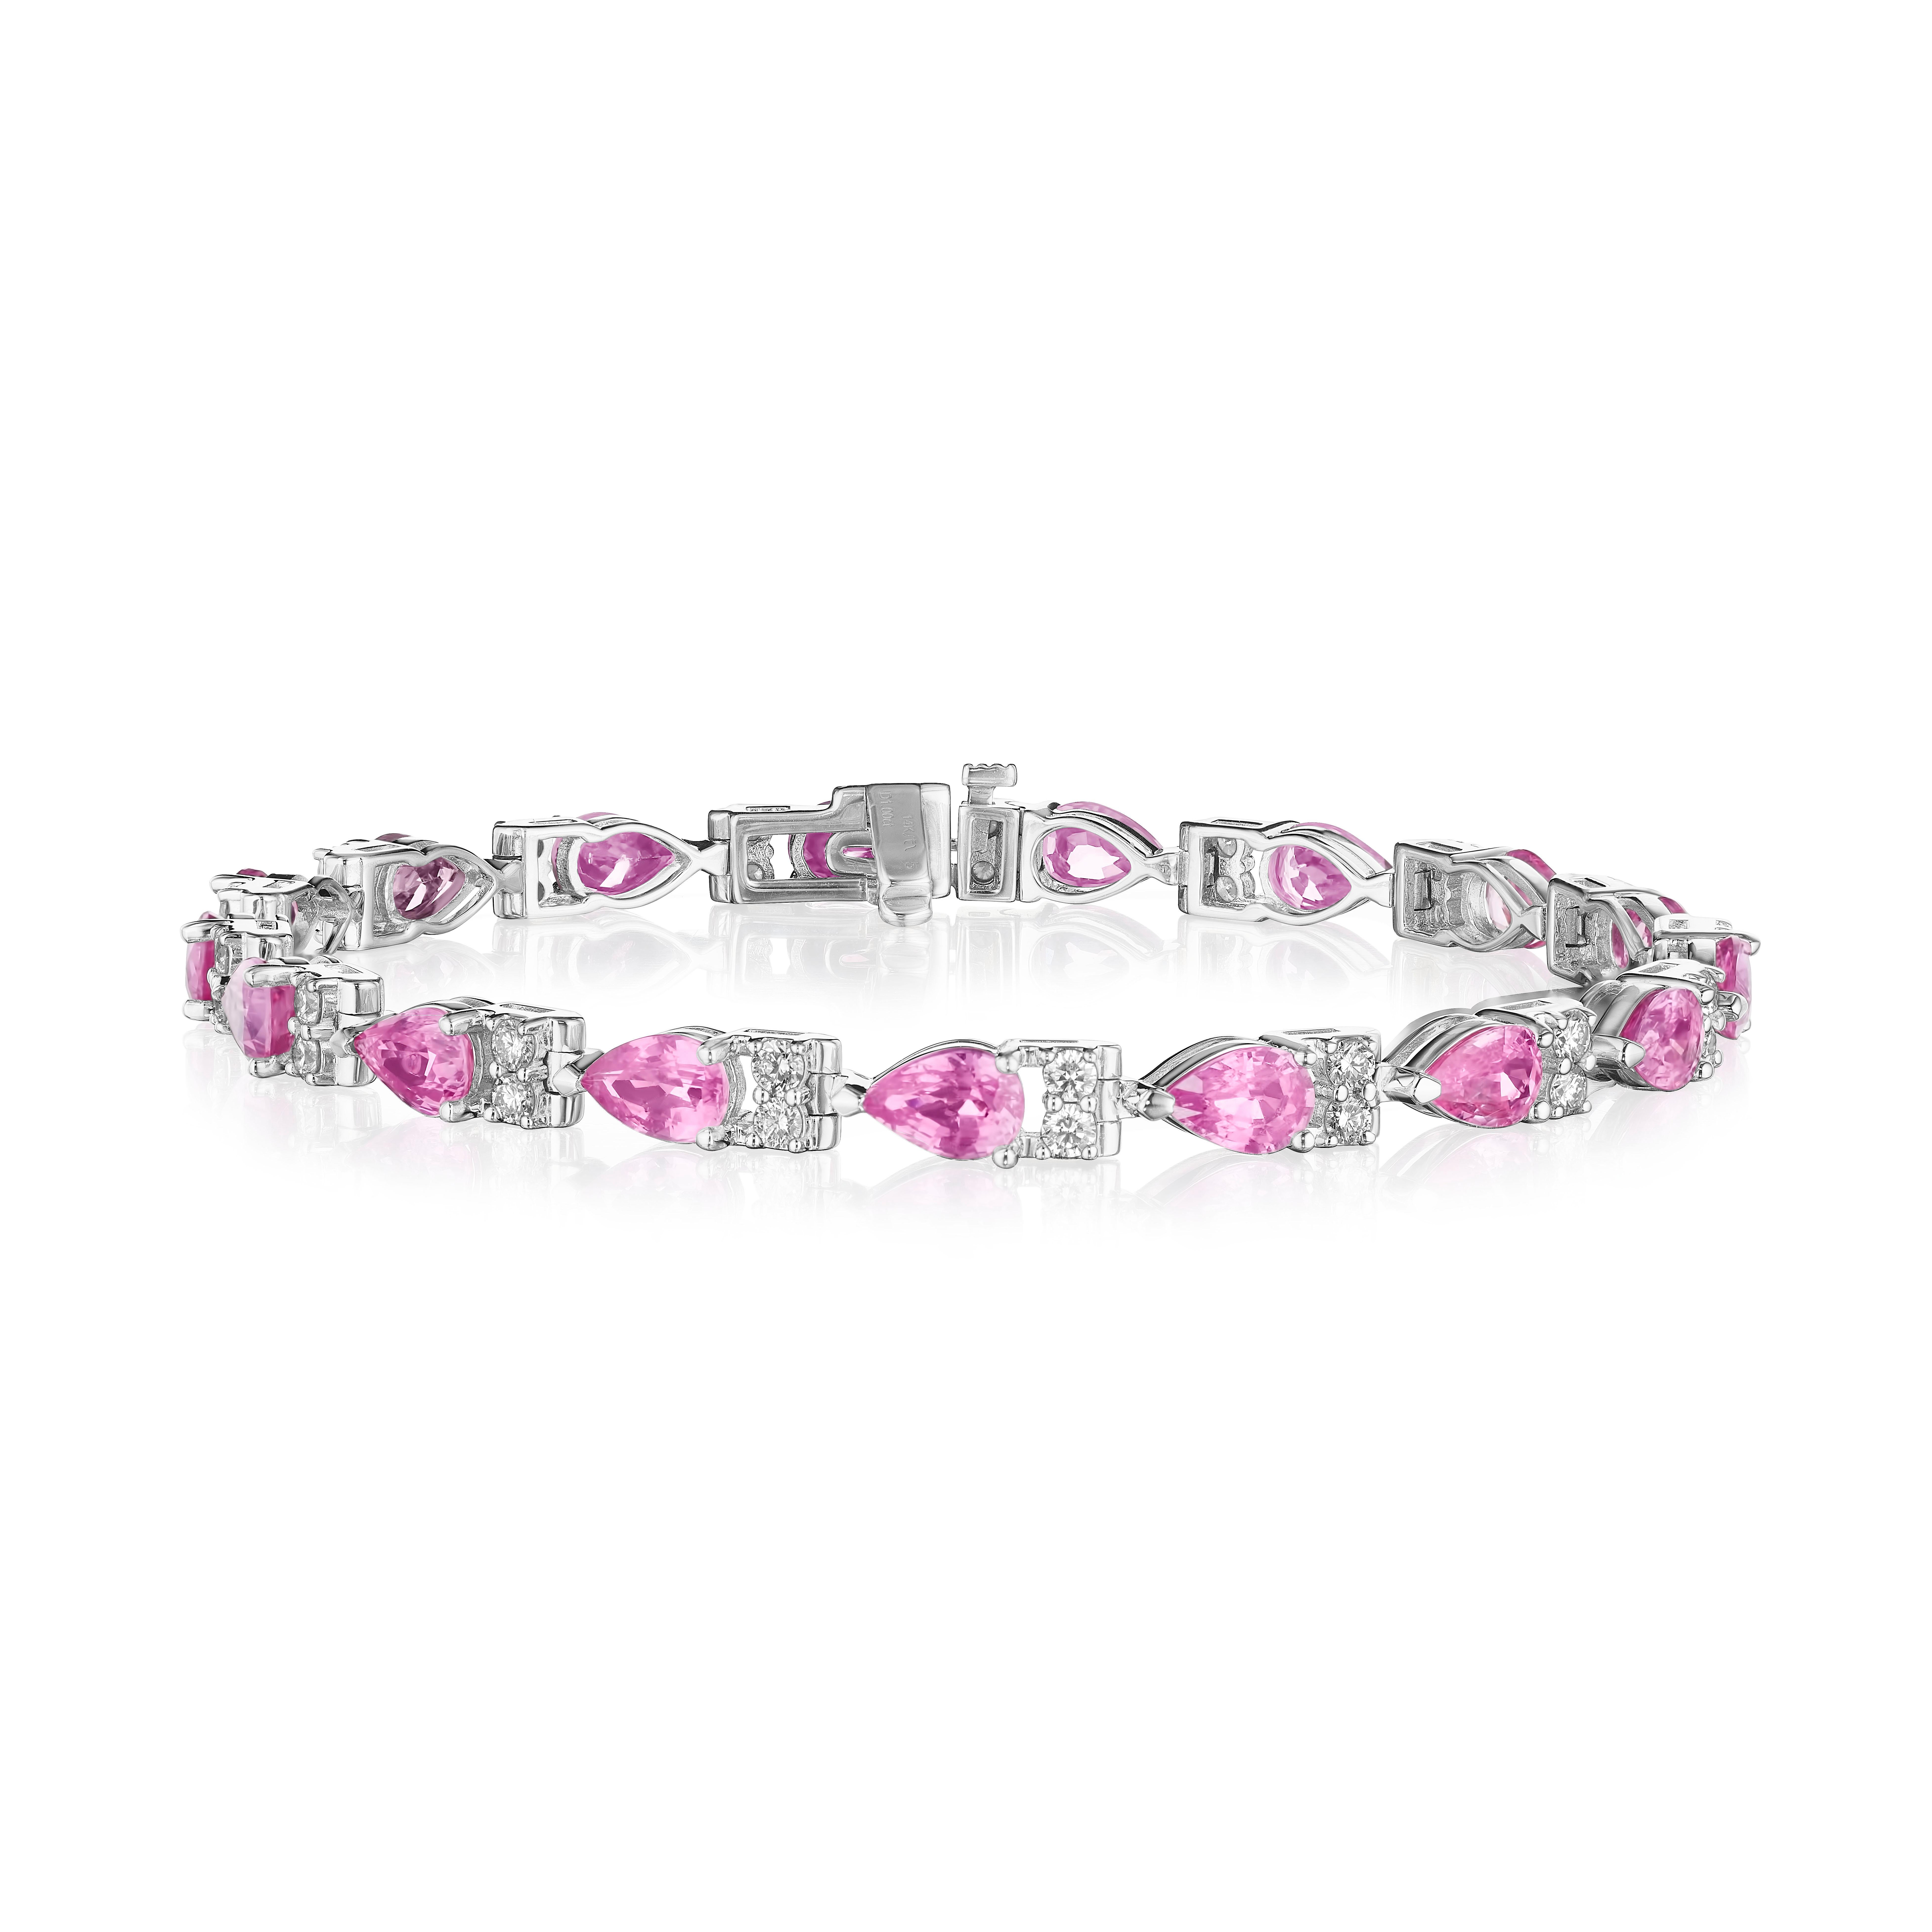 • A beautiful row of pink pear shape sapphires and white round brilliant cut diamonds encircle the wrist in this bracelet, set in 14KT gold. The bracelet measures 7